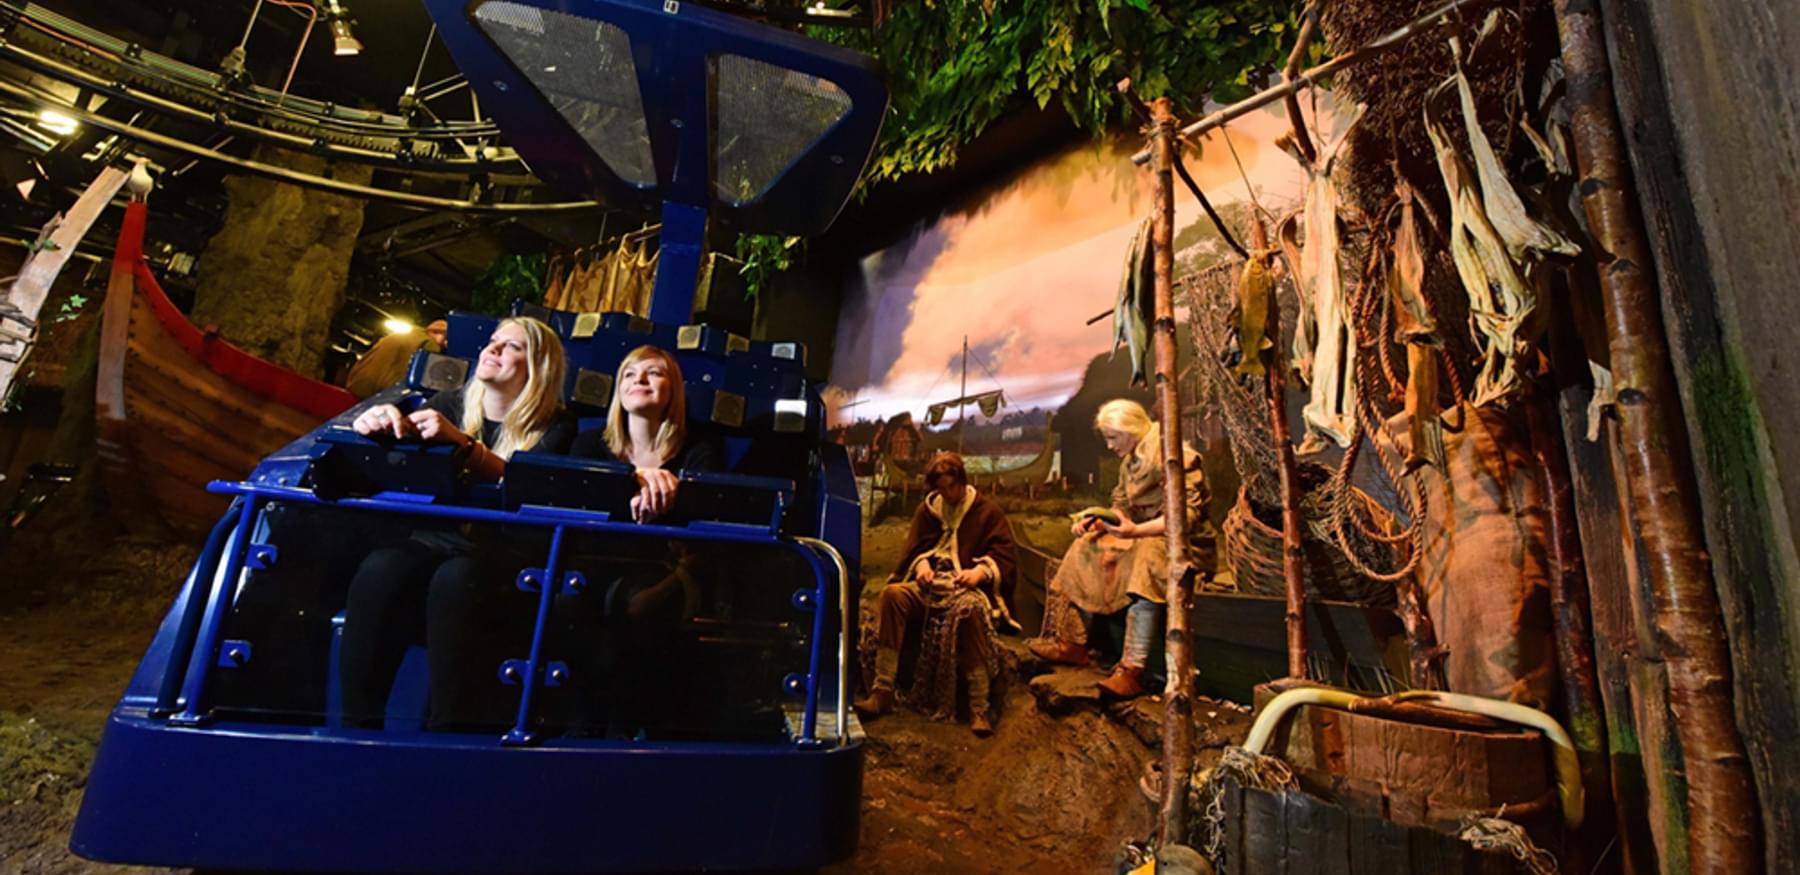 One year on and JORVIK shows that the Vikings continue to be a tourism magnet for York